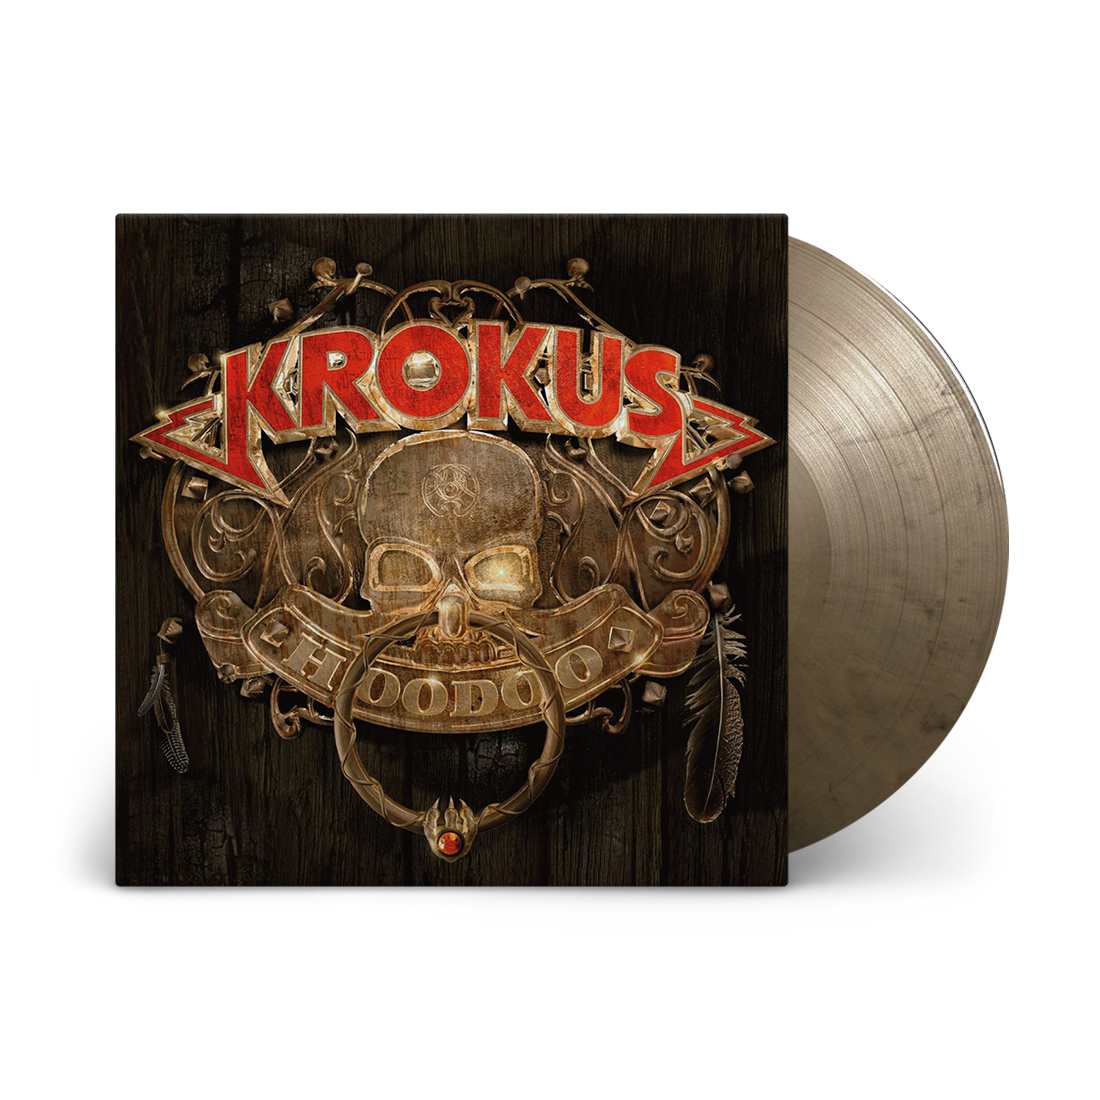 Hoodoo : Limited Edition Black and Gold Marbled Vinyl LP